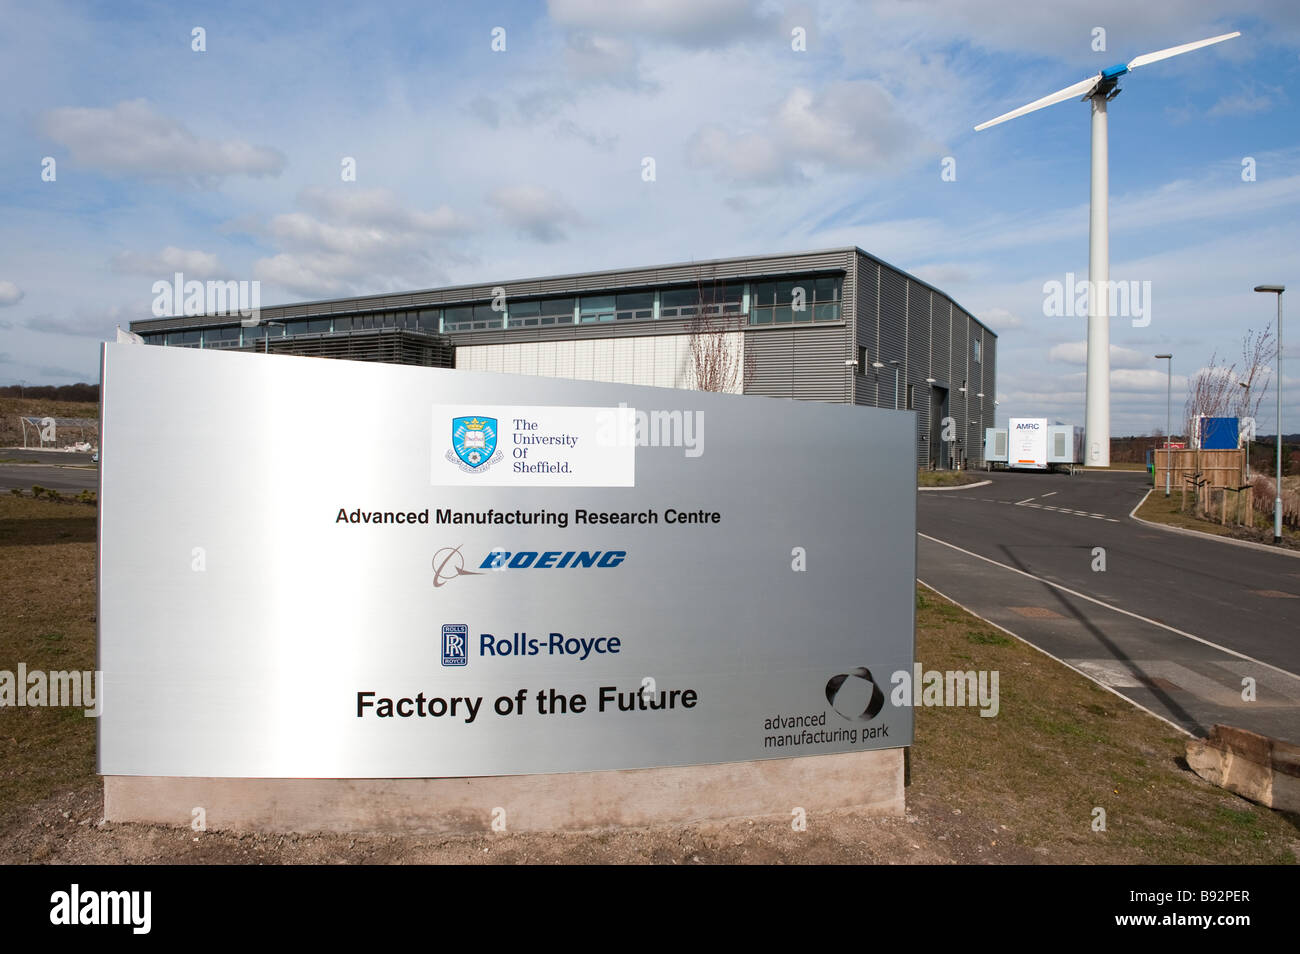 University of Sheffield Advanced Manufacturing Research Centre Stockfoto